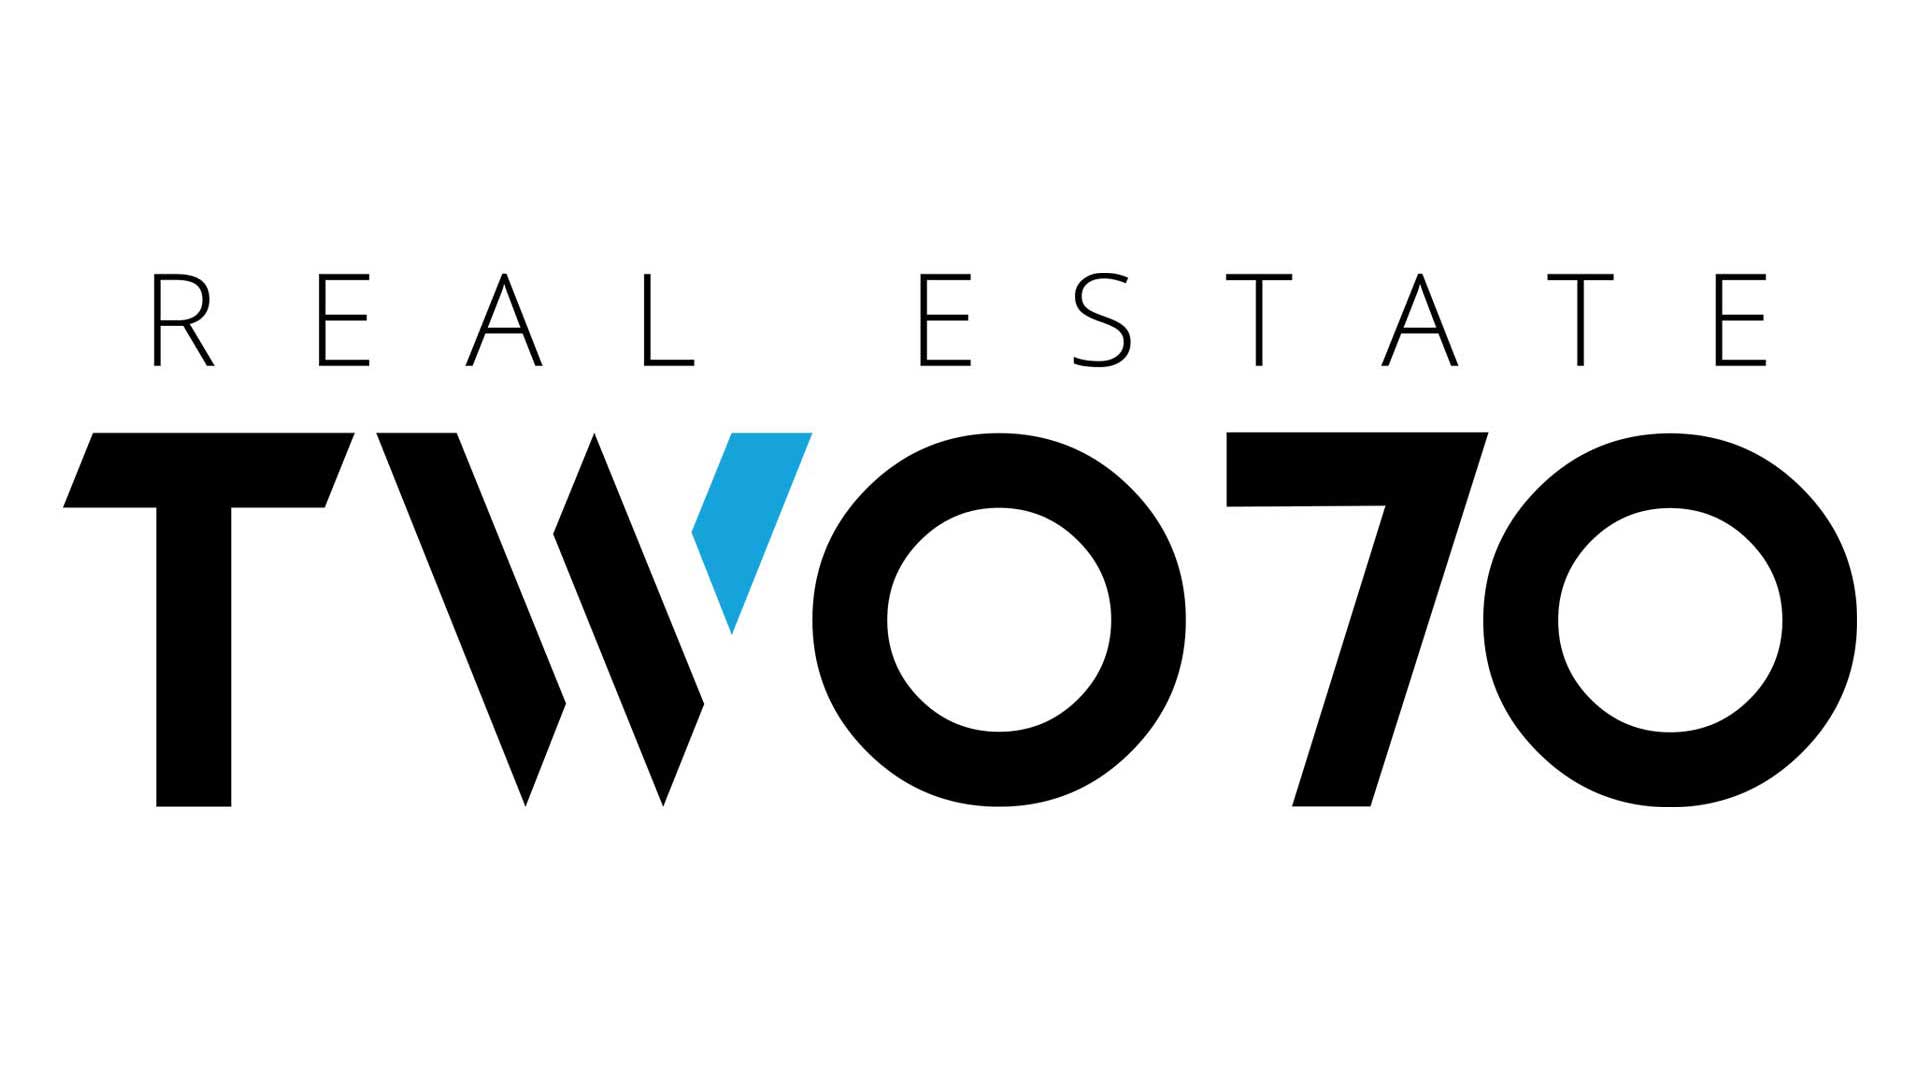 Real Estate Two 70